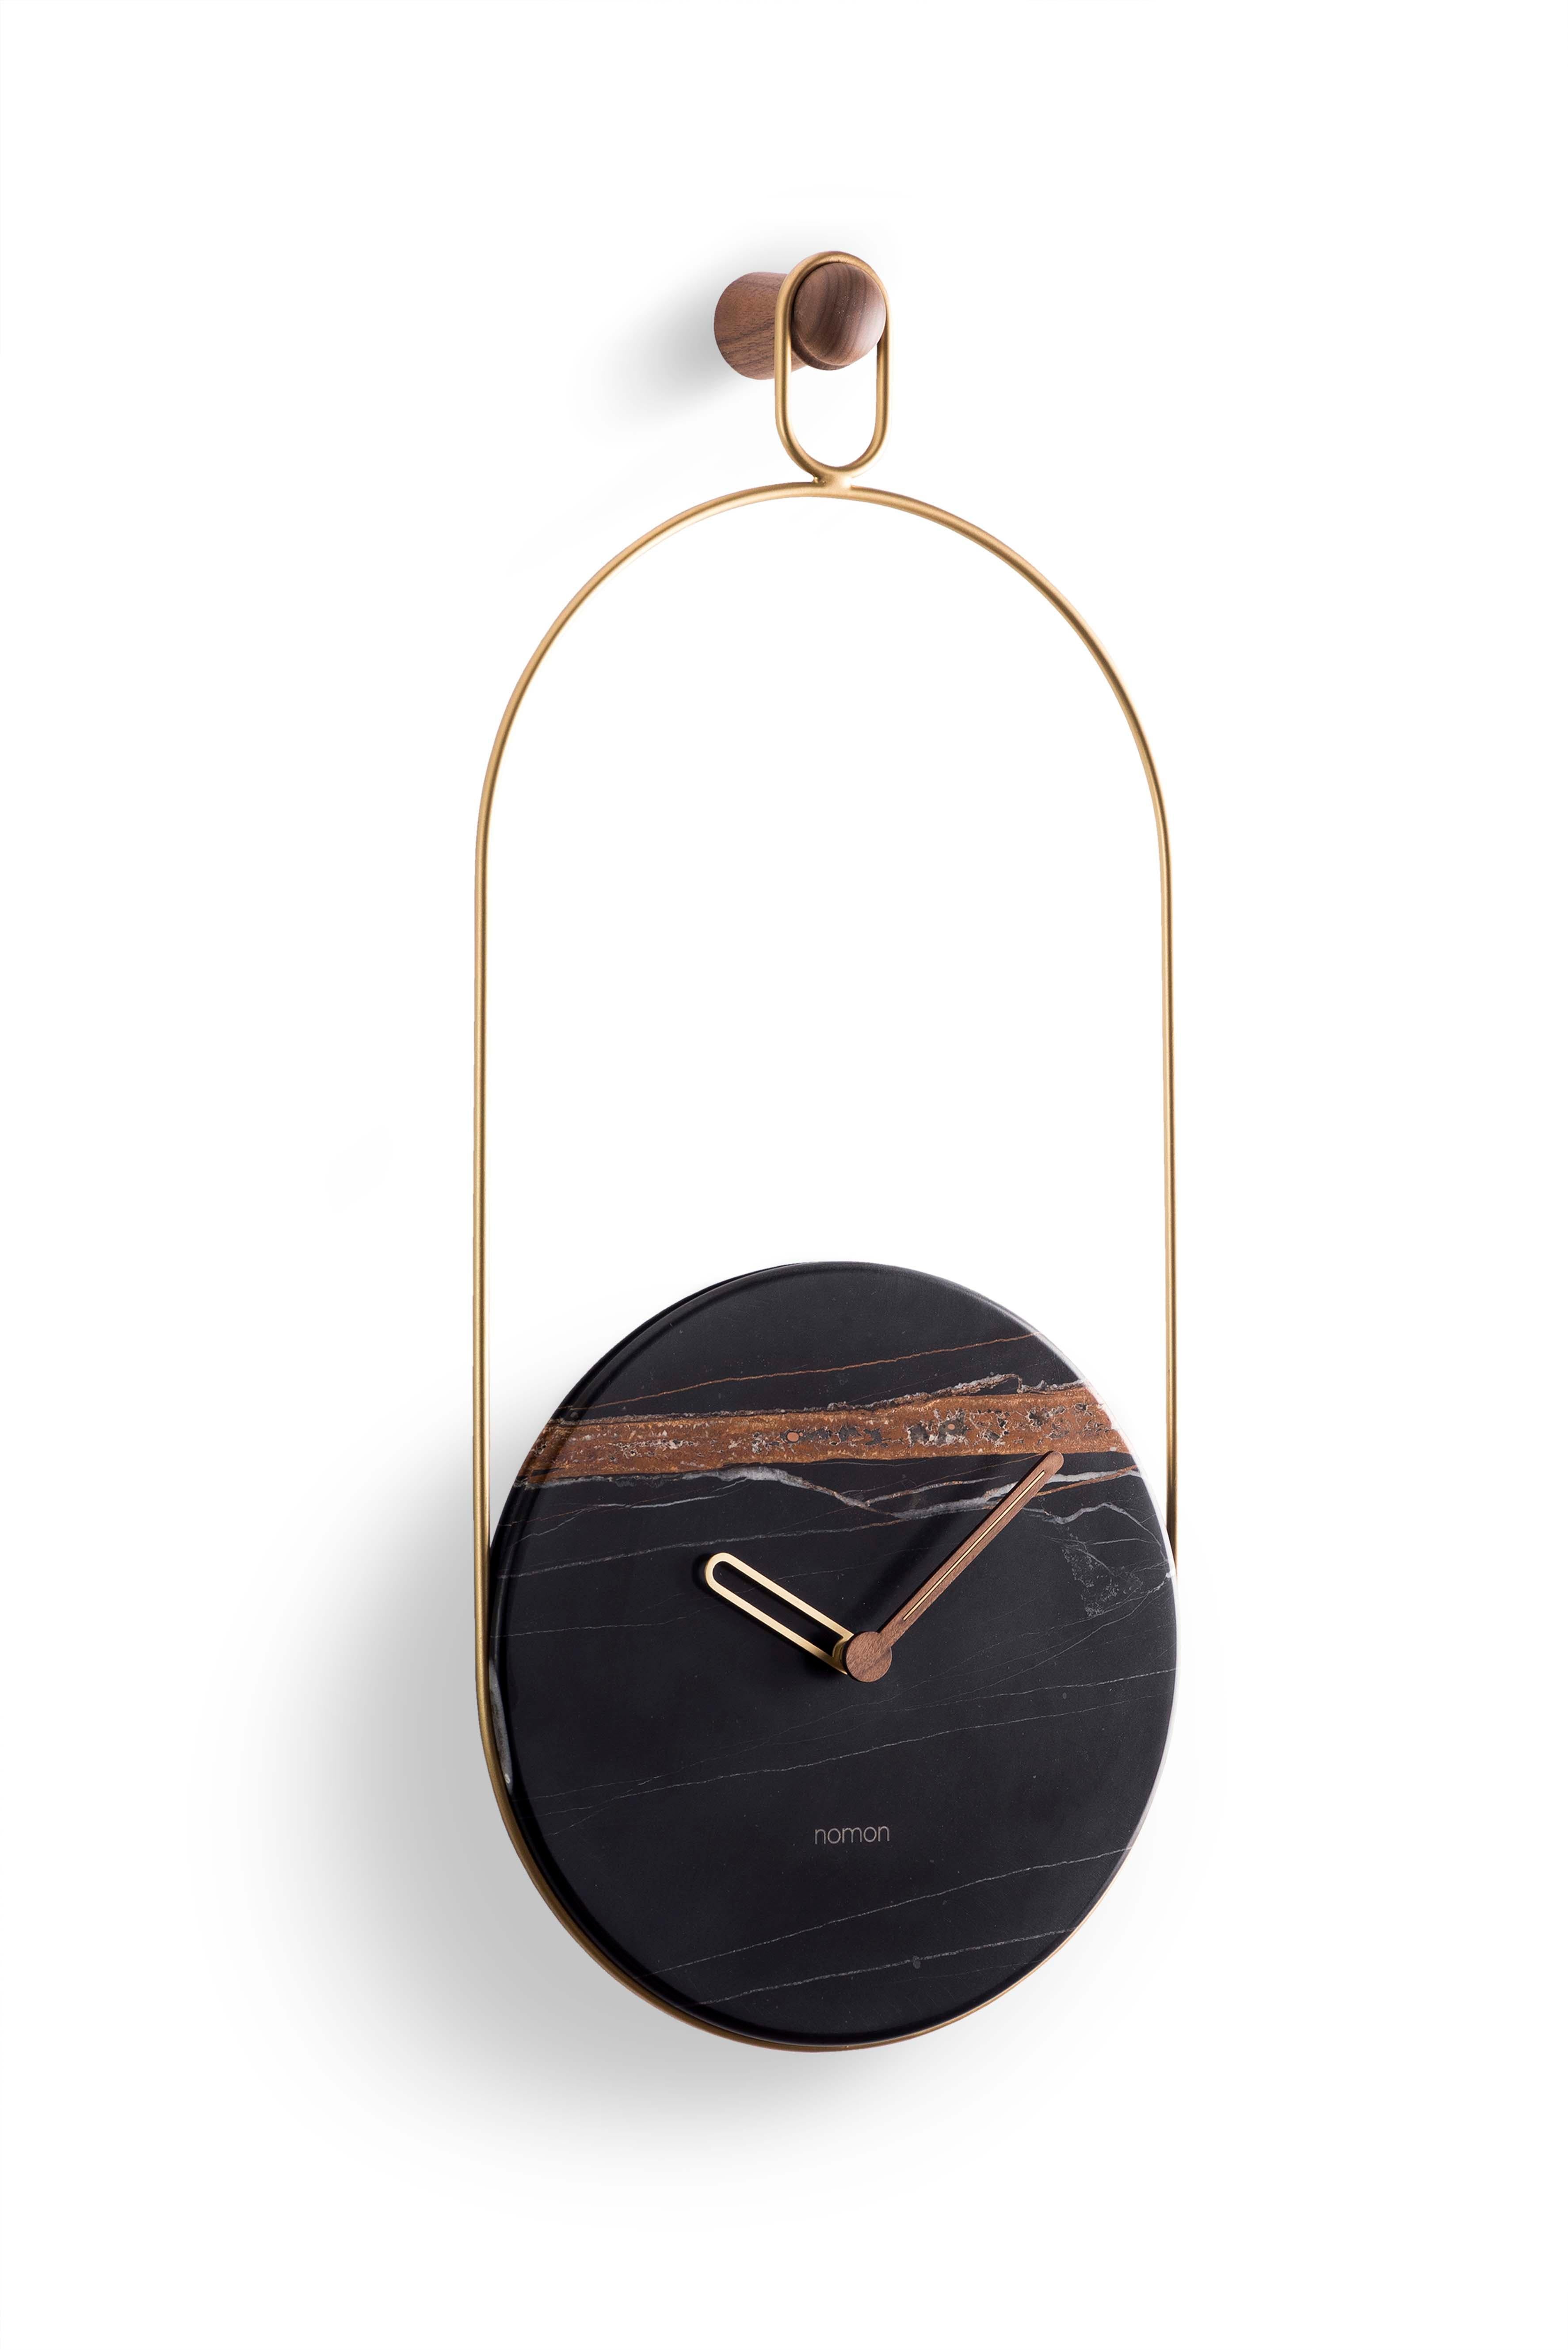 Nomon Eslabon Wall Clock  By Andres Martinez For Sale 8